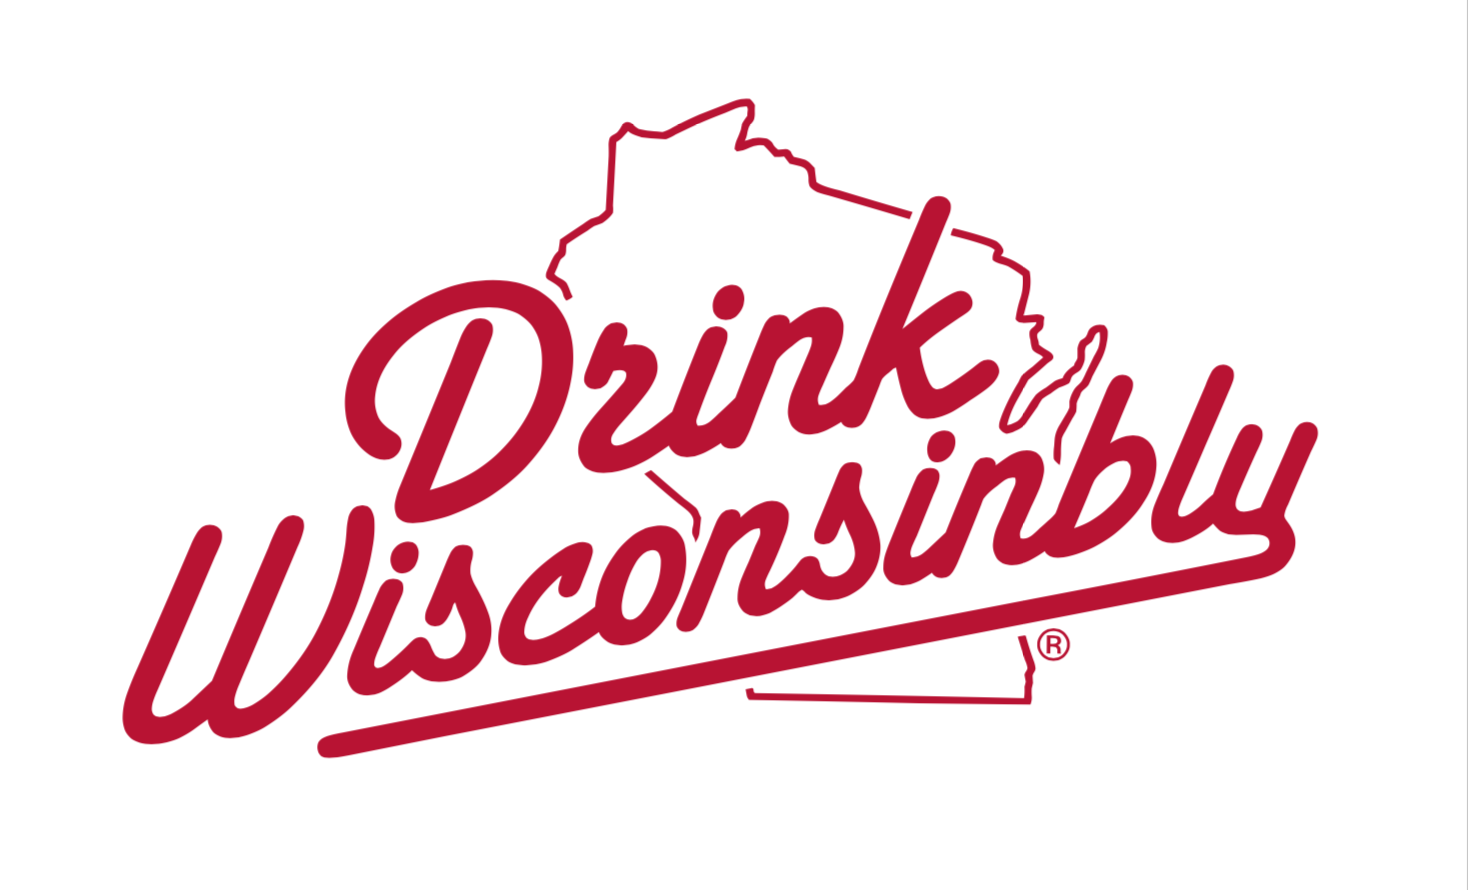 DrinkWisconsinbly.png